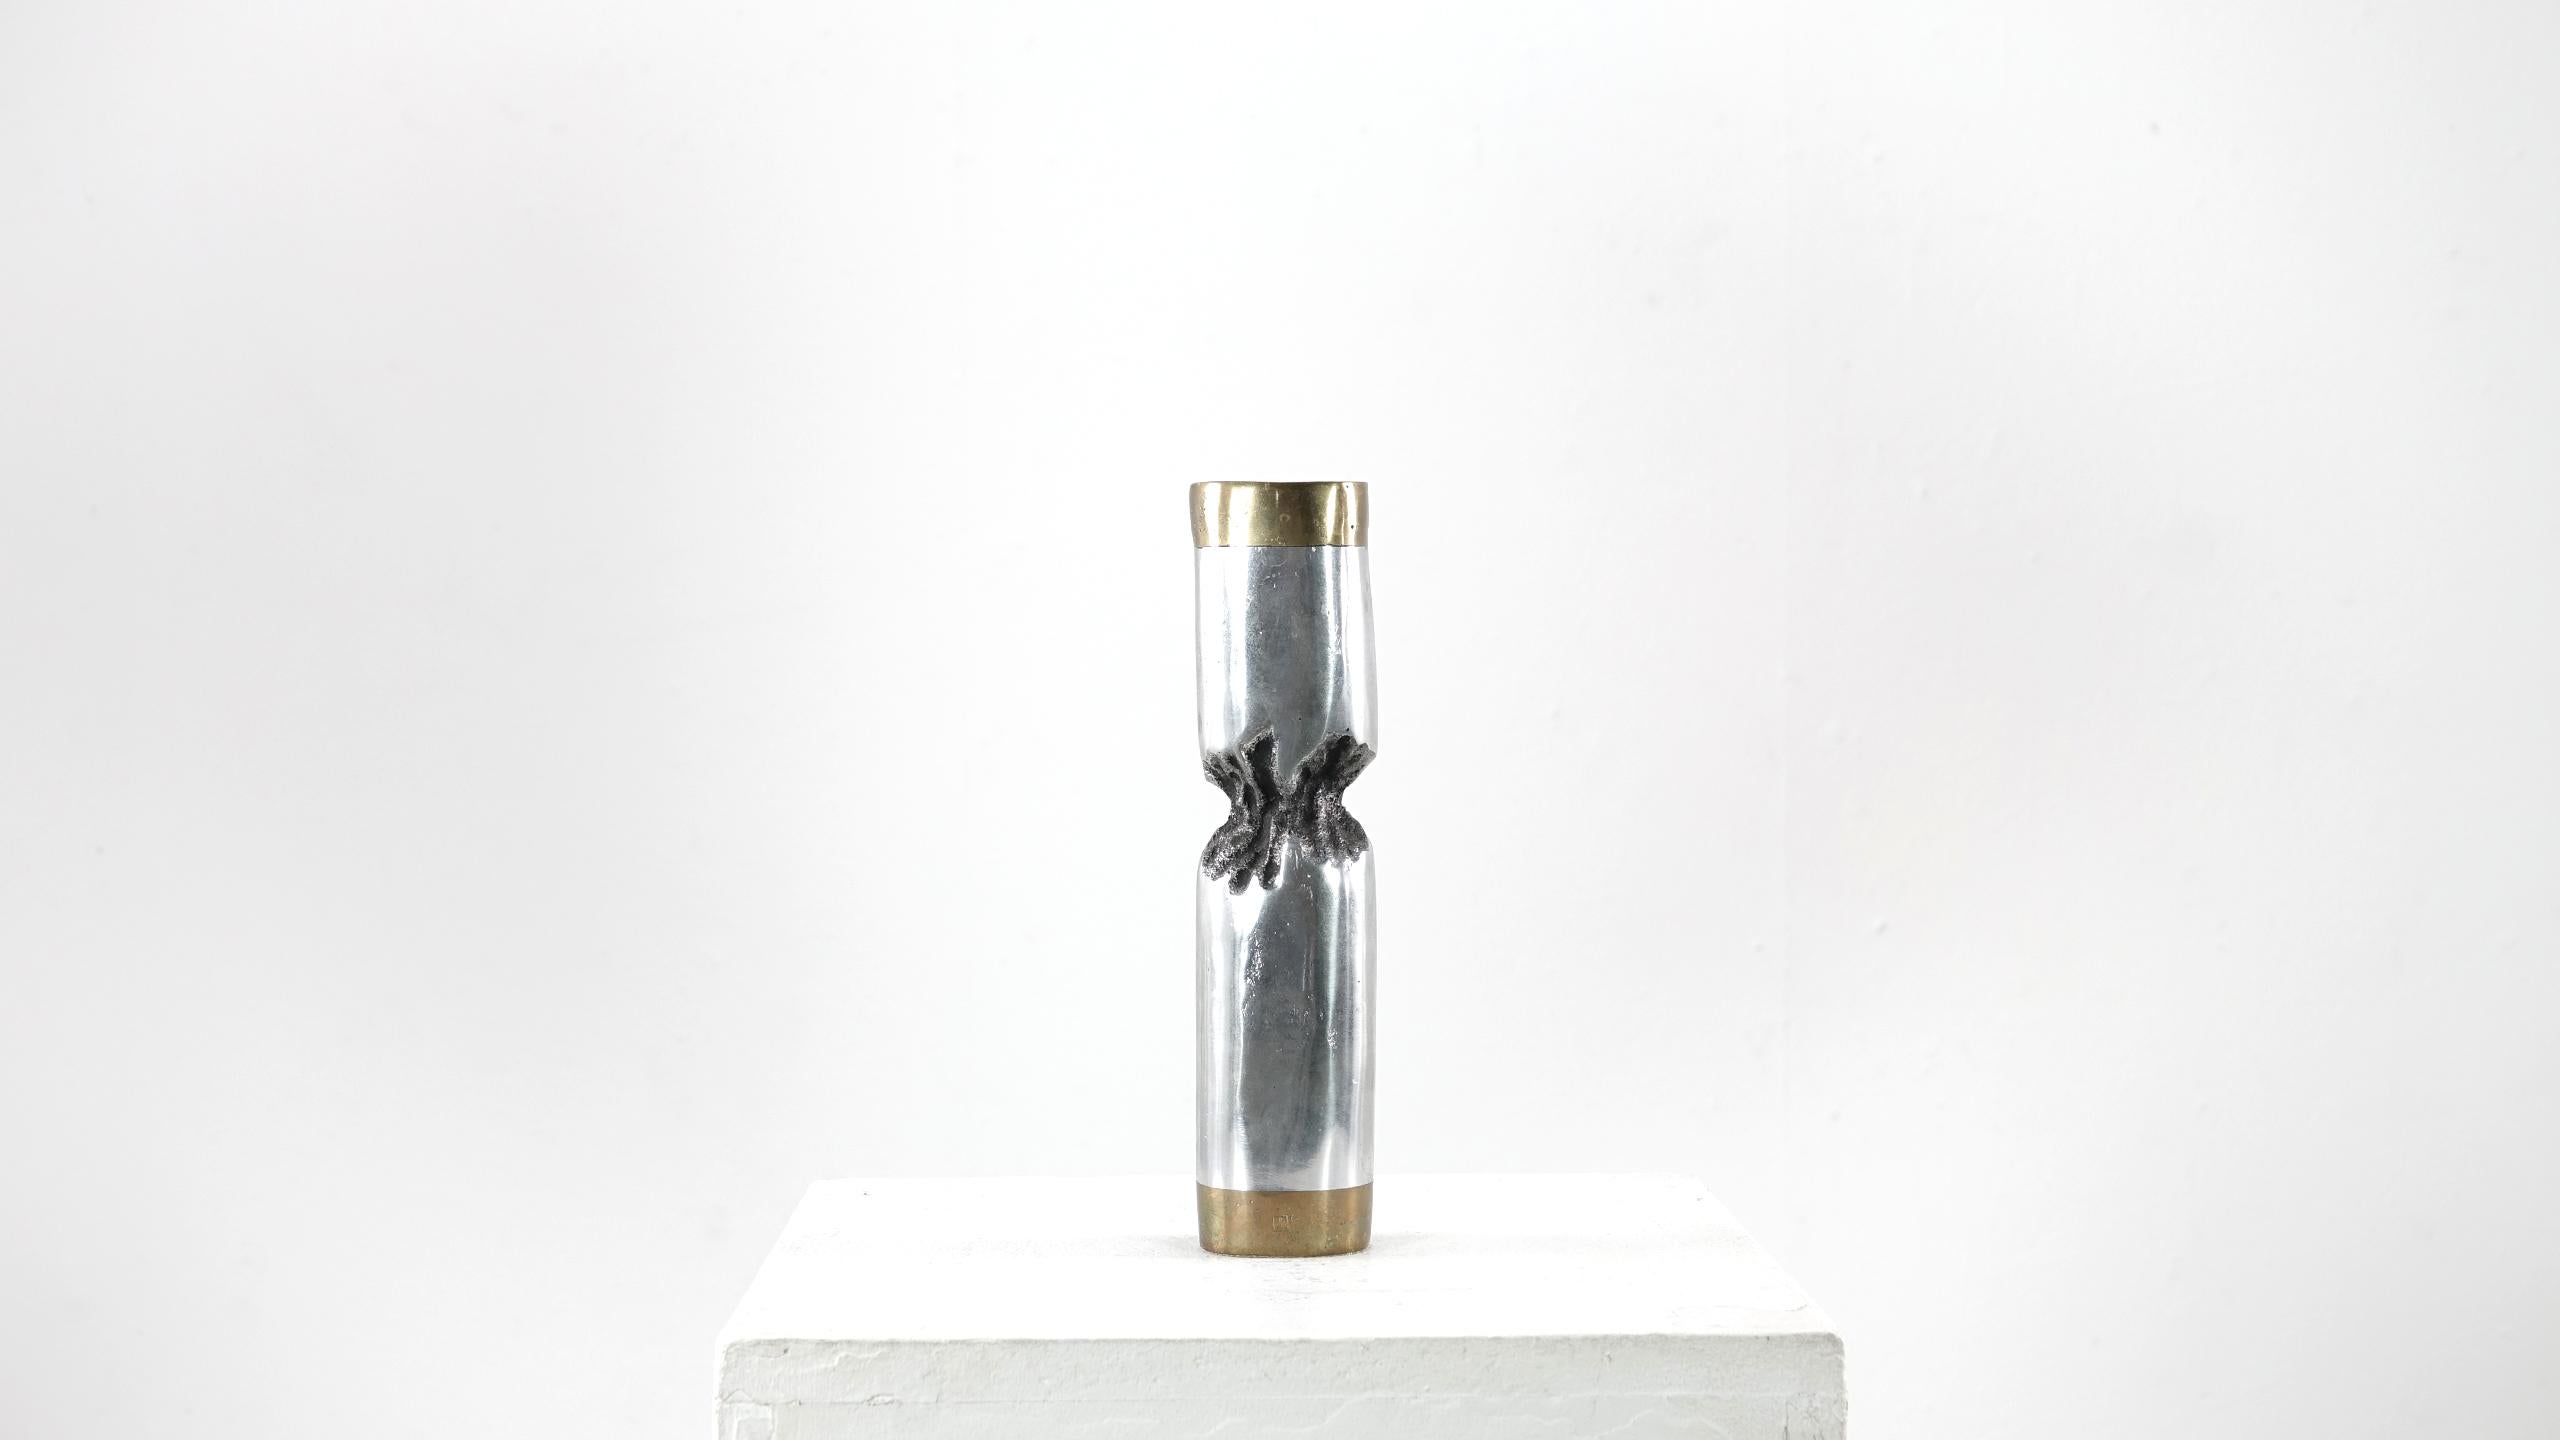 Original signed David Marshall Desenos Brutalist aluminum and brass candlestick in very good condition with a light patina all around. Very good vintage item has no defects, light wear consistent with age and use.